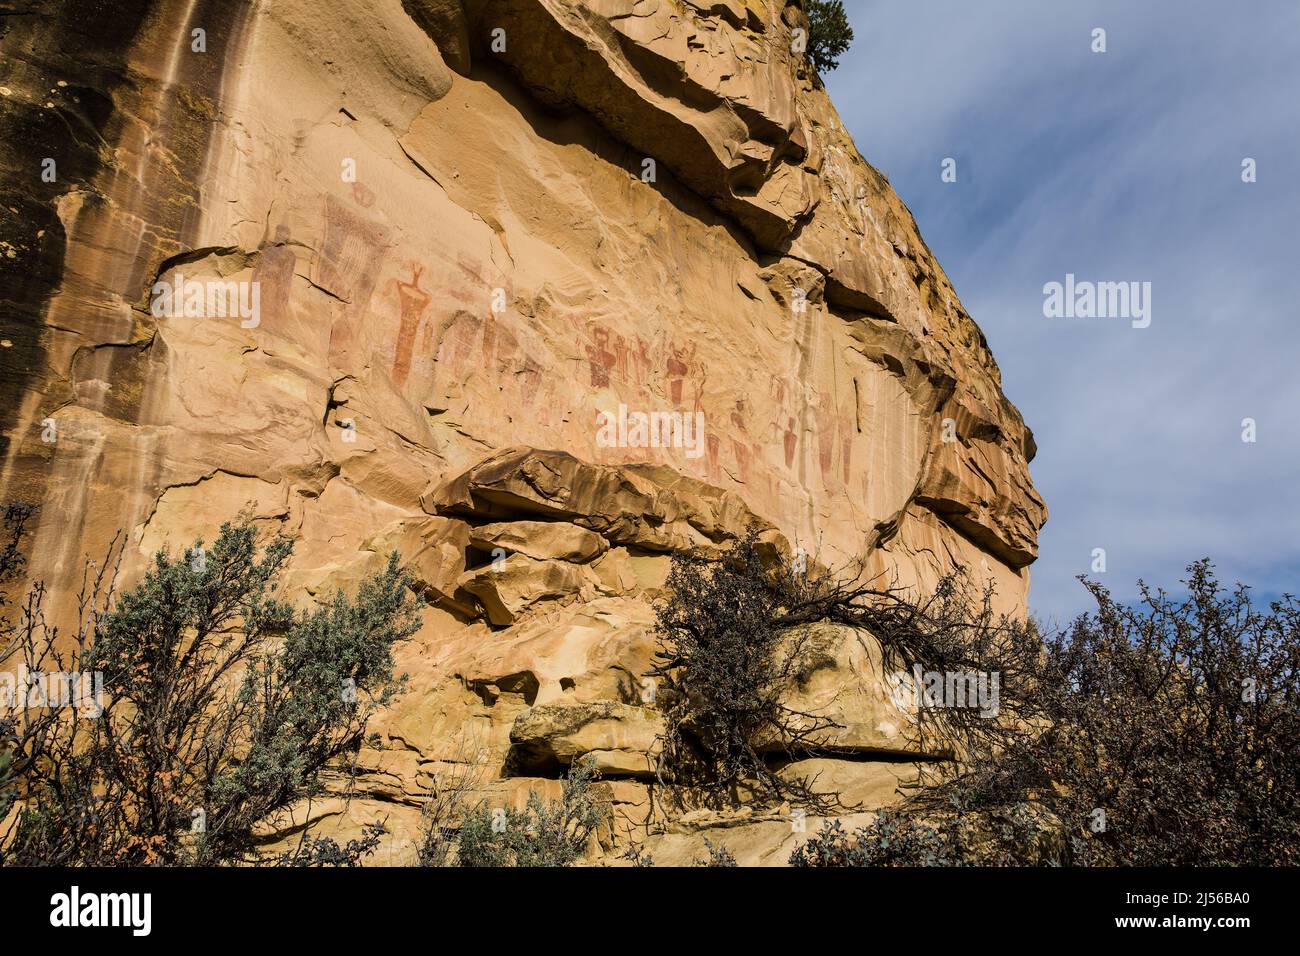 The Sego Canyon pictograph rock art panel in Utah was painted by the people of Archaic Culture in the Barrier Canyon style between 1,500 and 4,000 yea Stock Photo